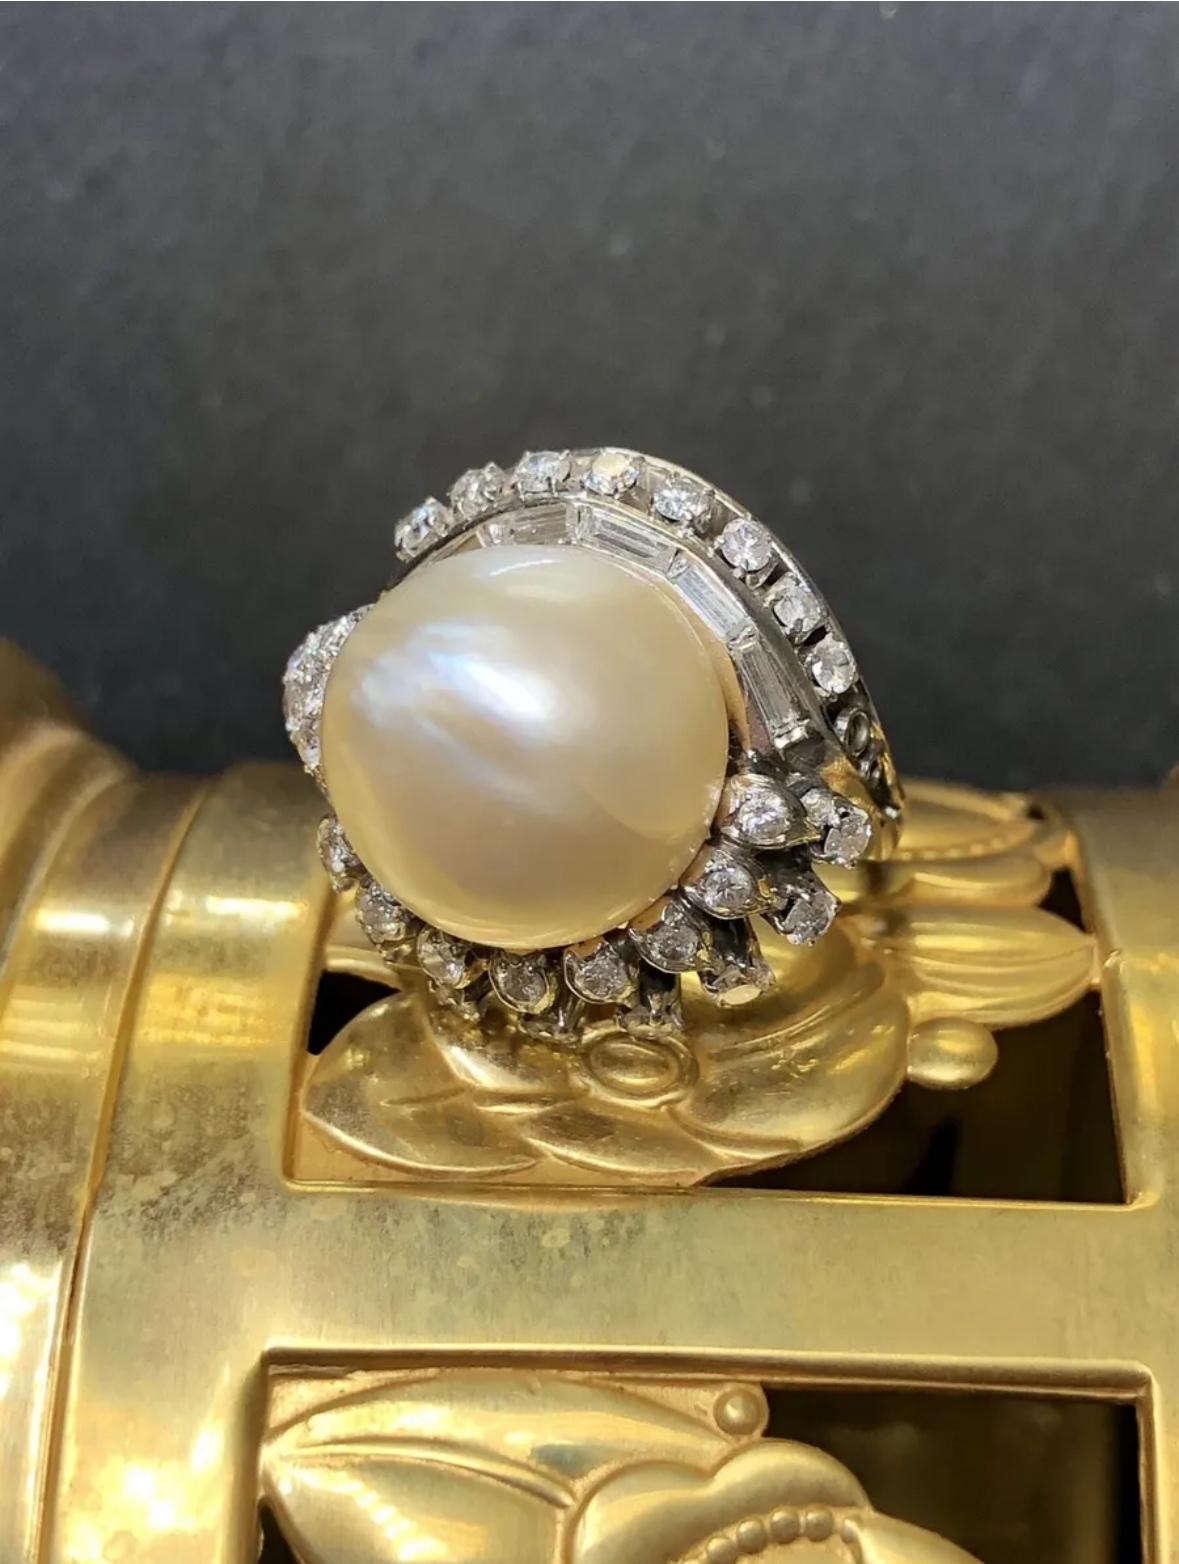 An original retro cocktail ring Circa the 1950’s done in platinum set with approximately 1.08cttw in H-I color Vs2 to i1 clarity round and baguette diamonds centered by a 13.47mm baroque, freshwater pearl.


Dimensions/Weight:

Ring measures .75” in